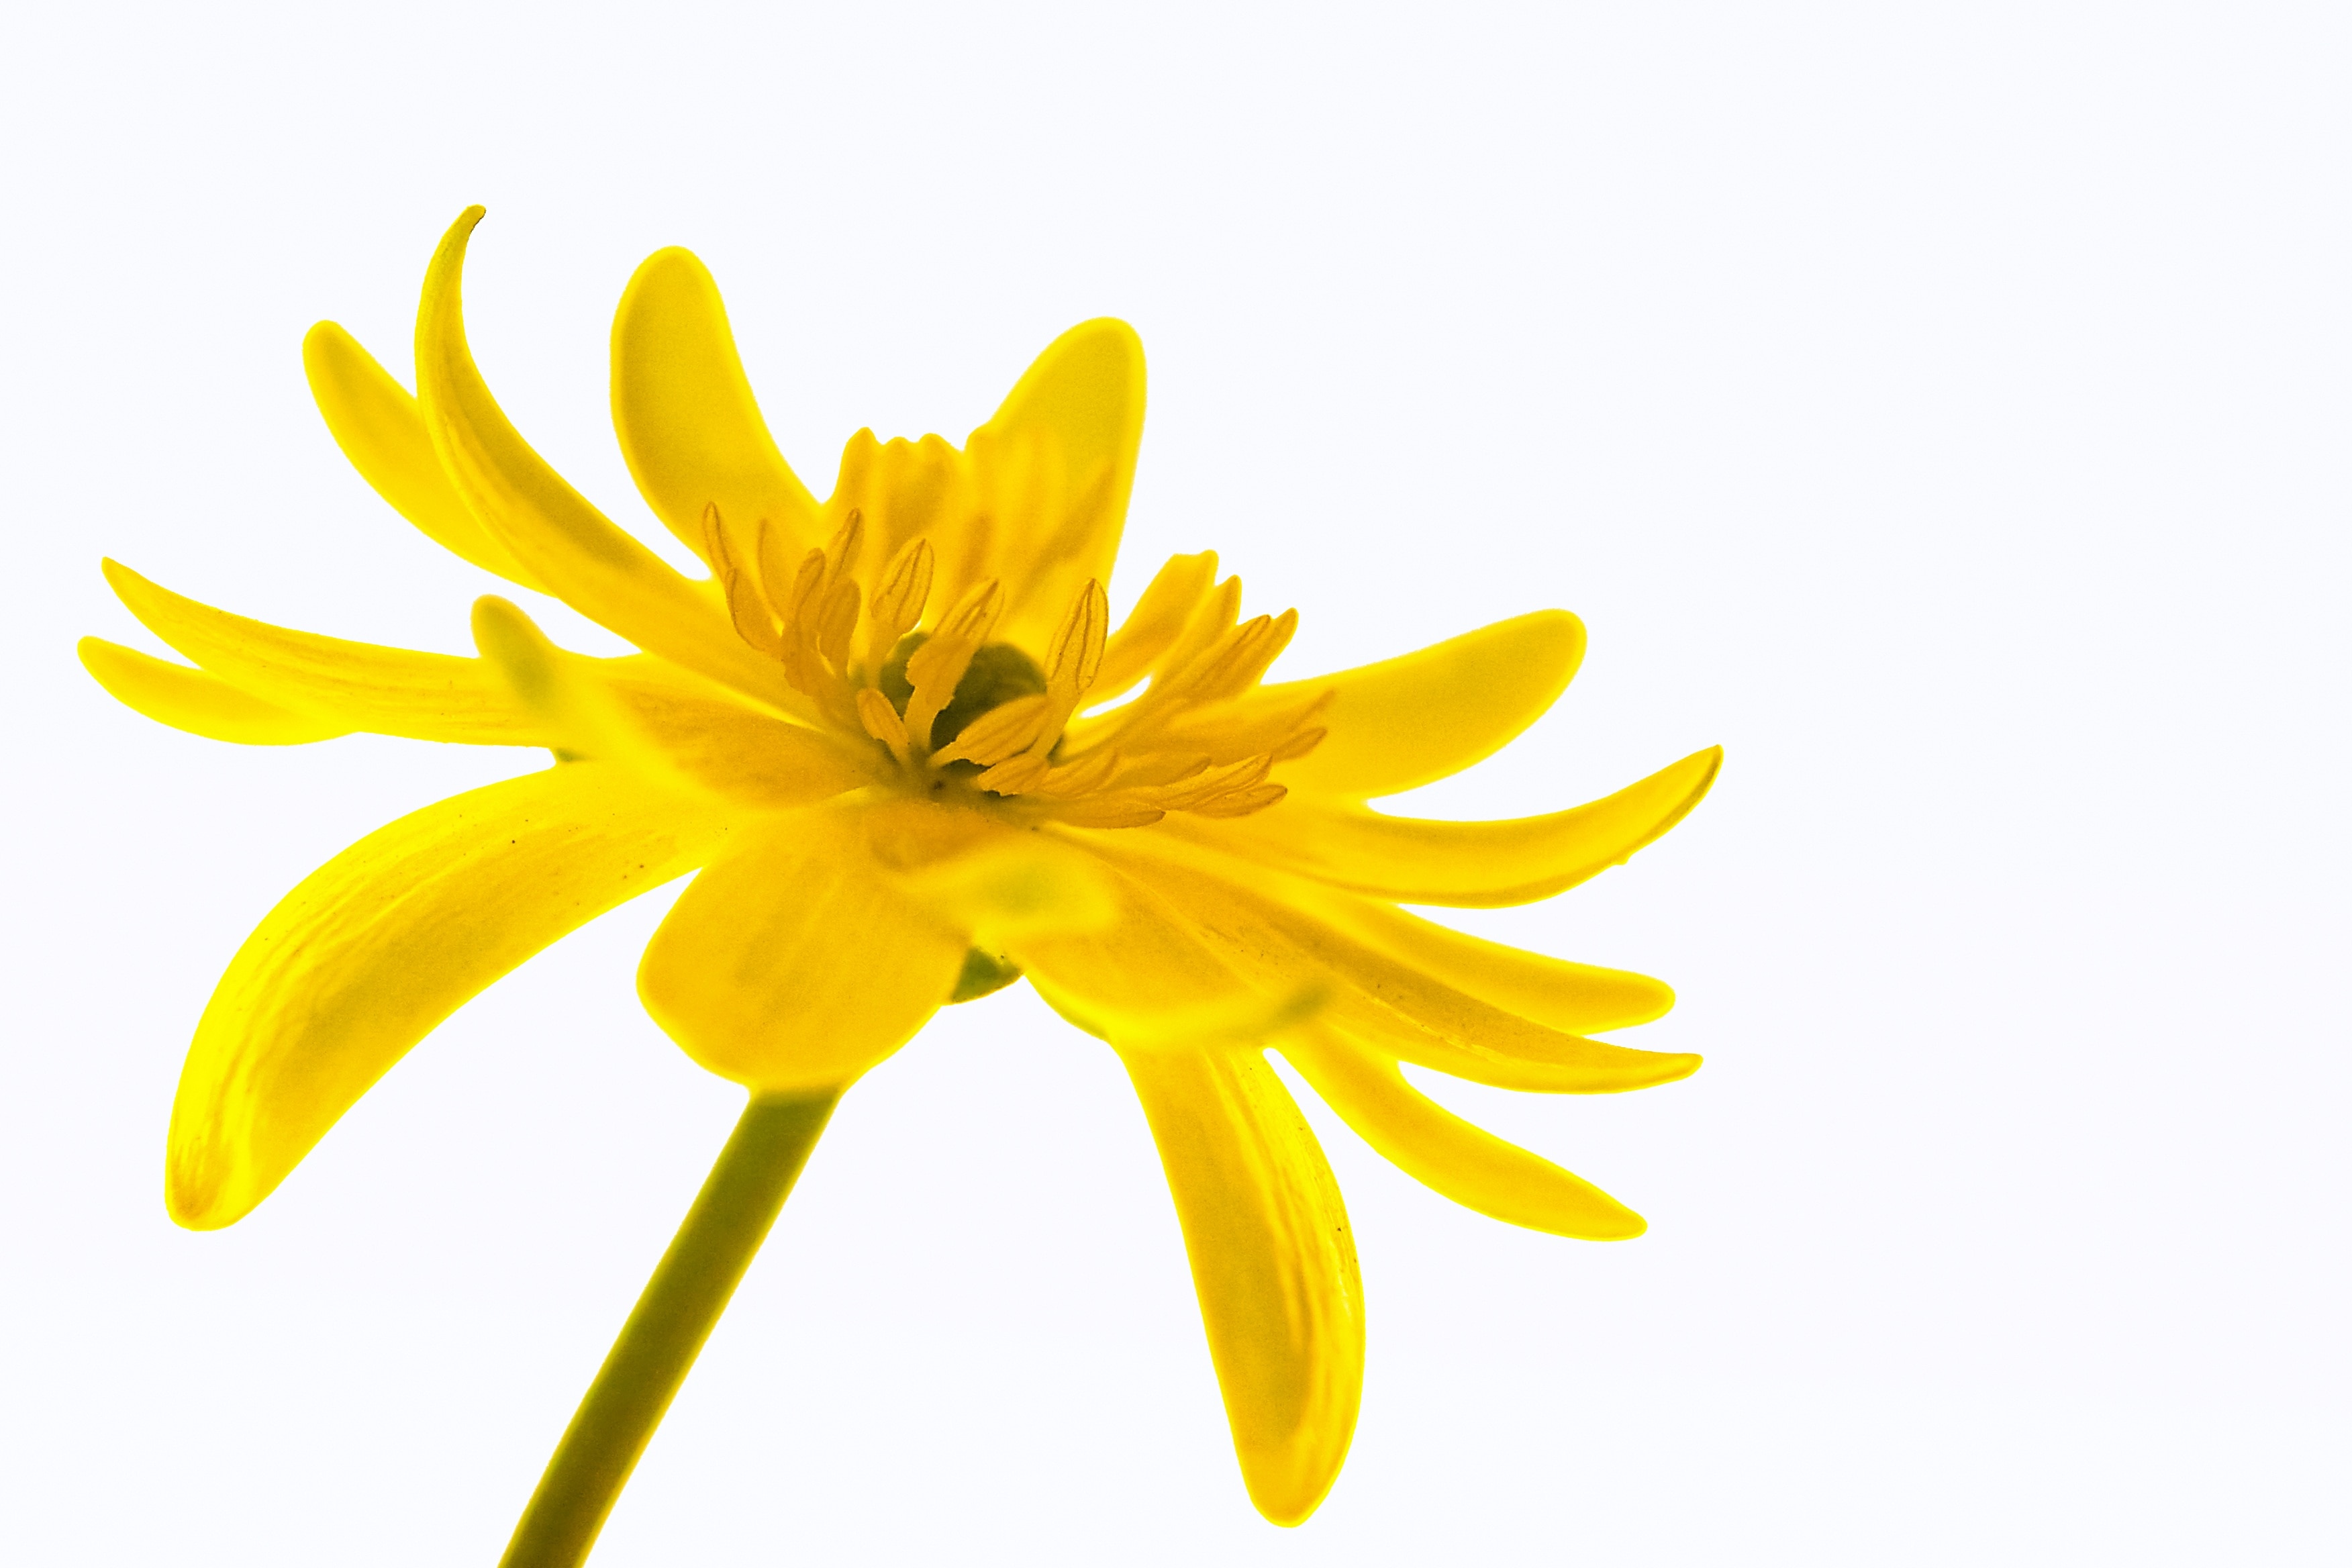 yellow sunflower photography with white background